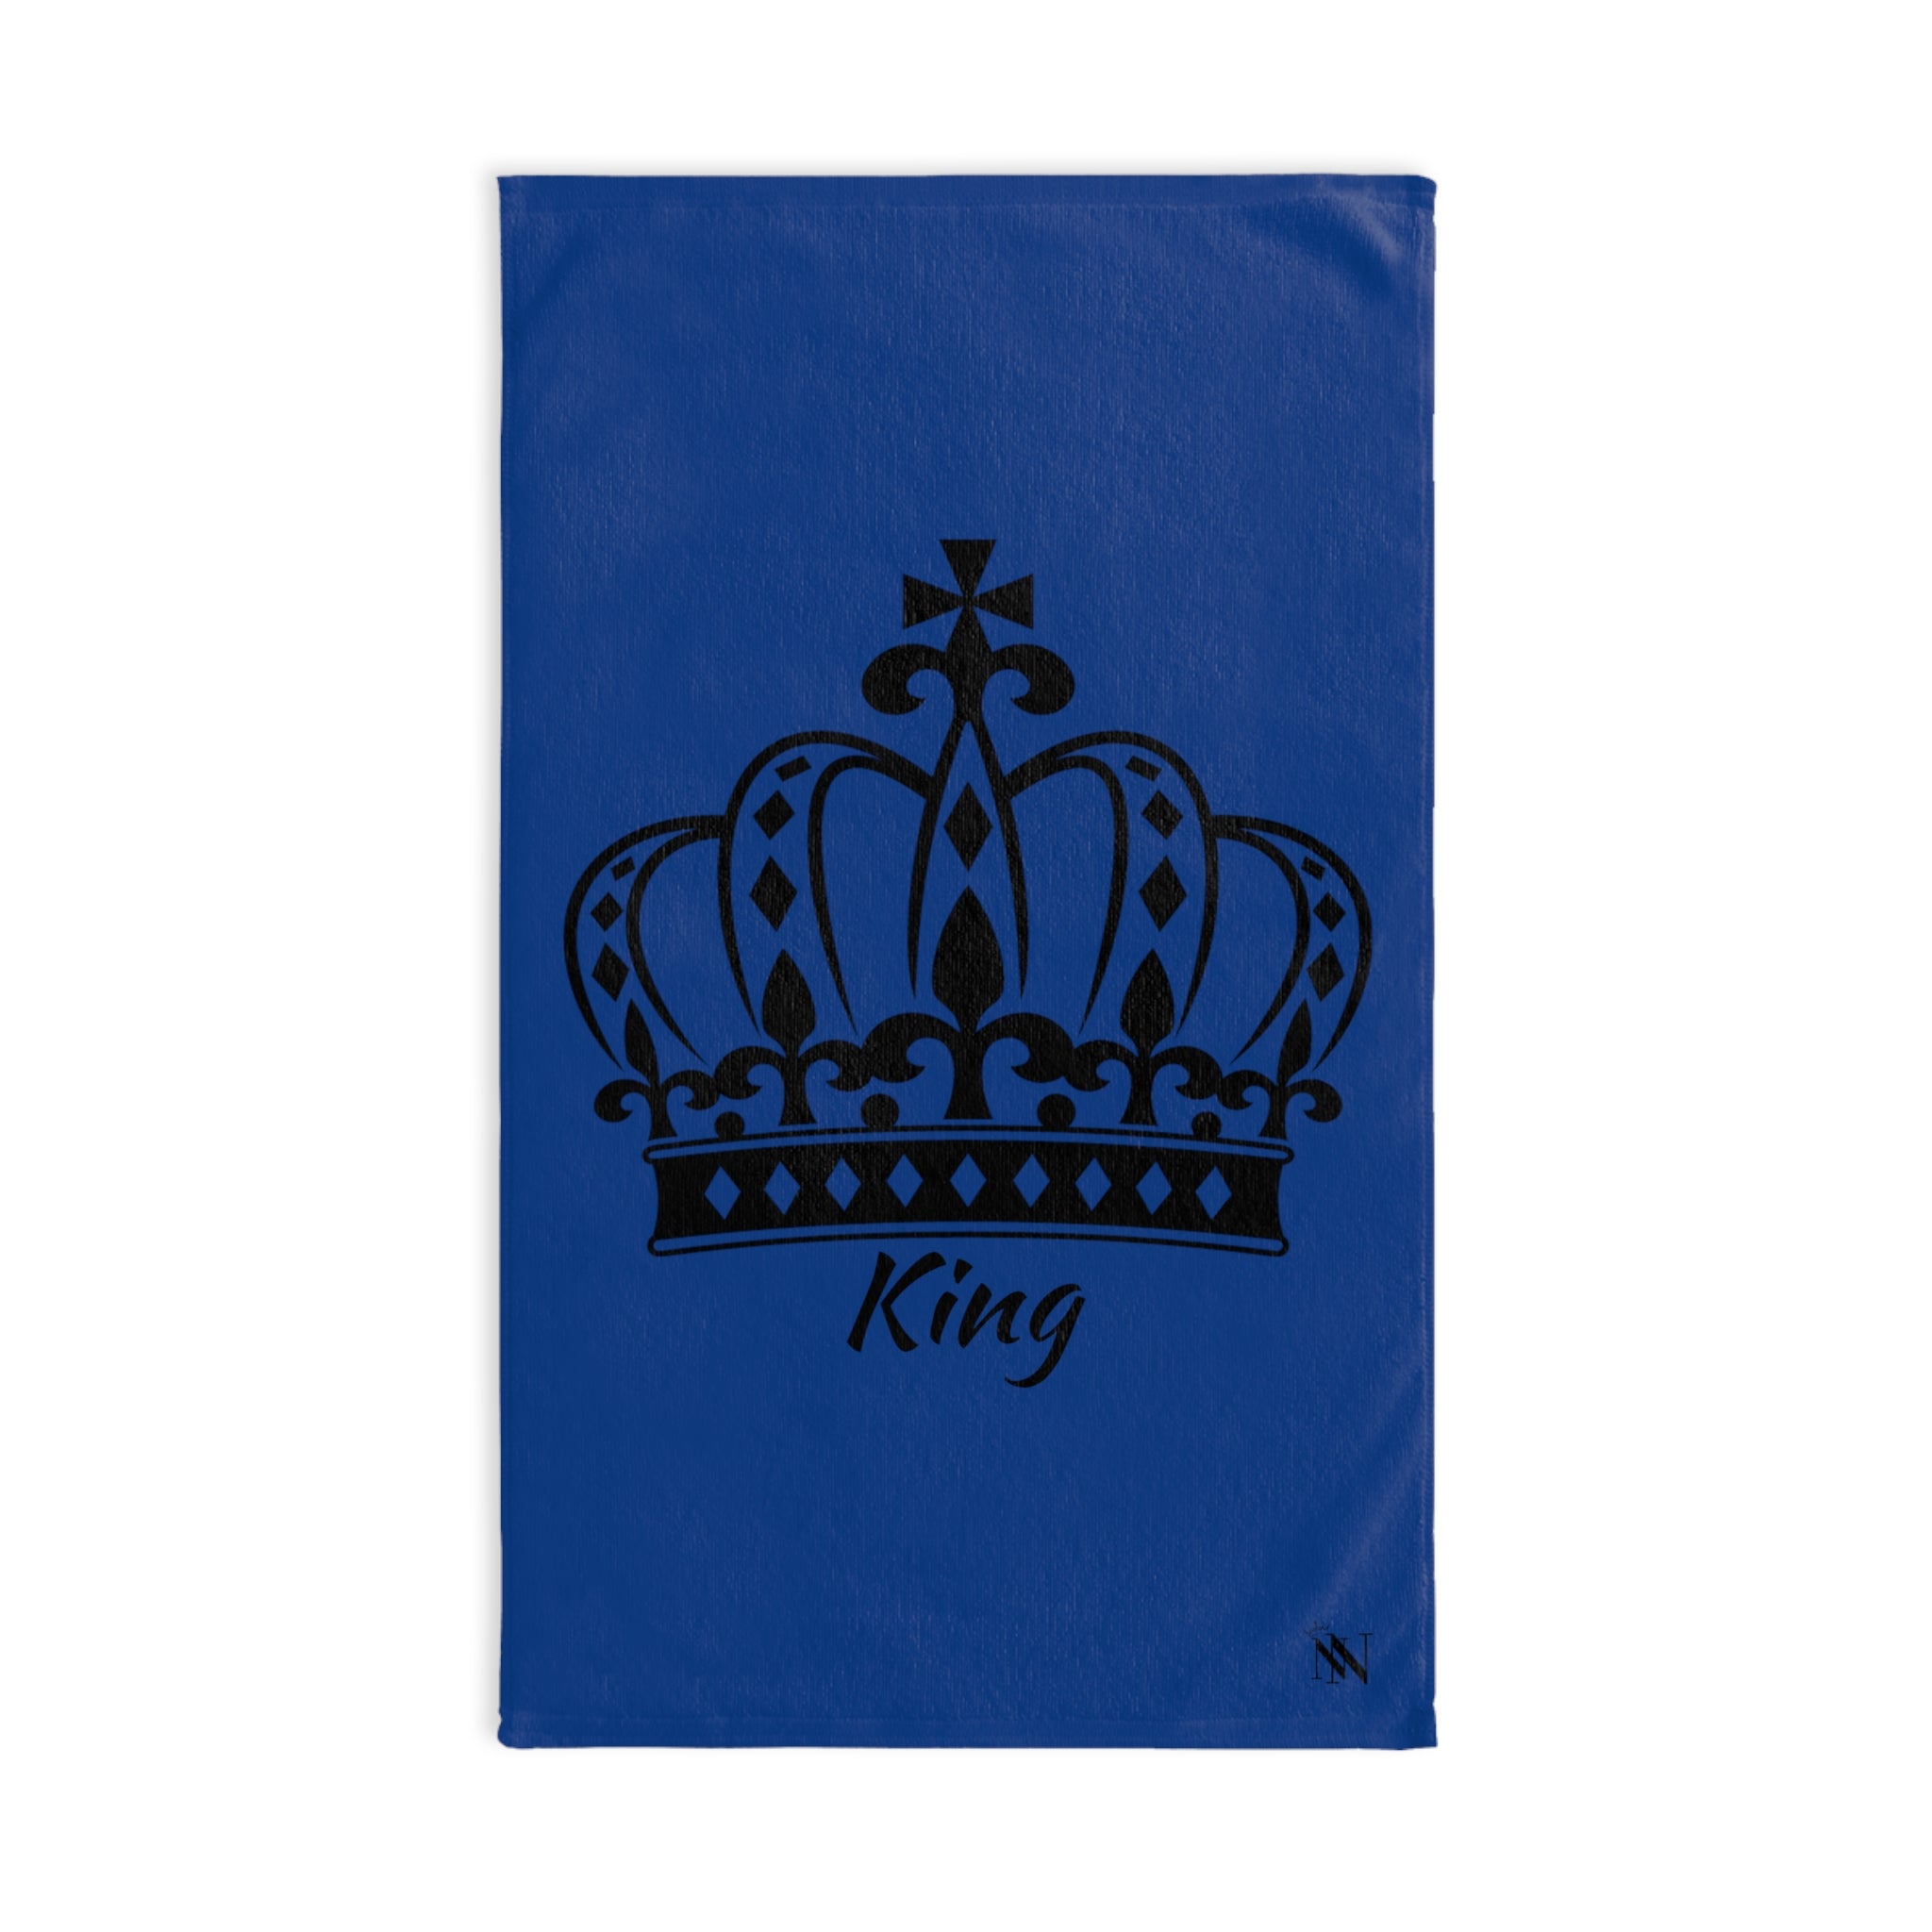 King Crown PrinceBlue | Gifts for Boyfriend, Funny Towel Romantic Gift for Wedding Couple Fiance First Year Anniversary Valentines, Party Gag Gifts, Joke Humor Cloth for Husband Men BF NECTAR NAPKINS